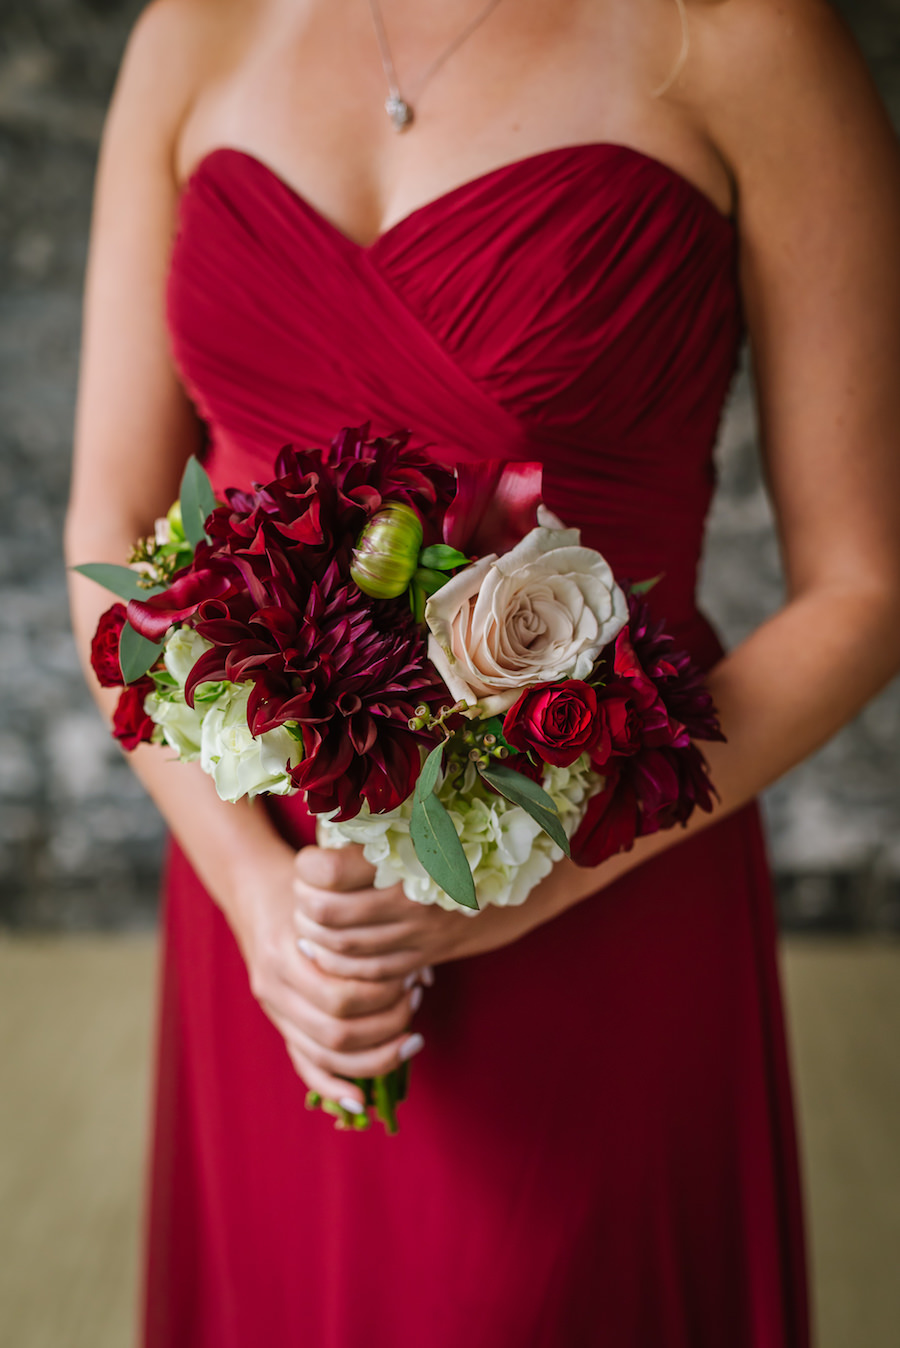 Strapless Bordeaux Bridesmaid Dress with Dark Red and Blush Rose, White Hydrangea and Greenery Bouquet